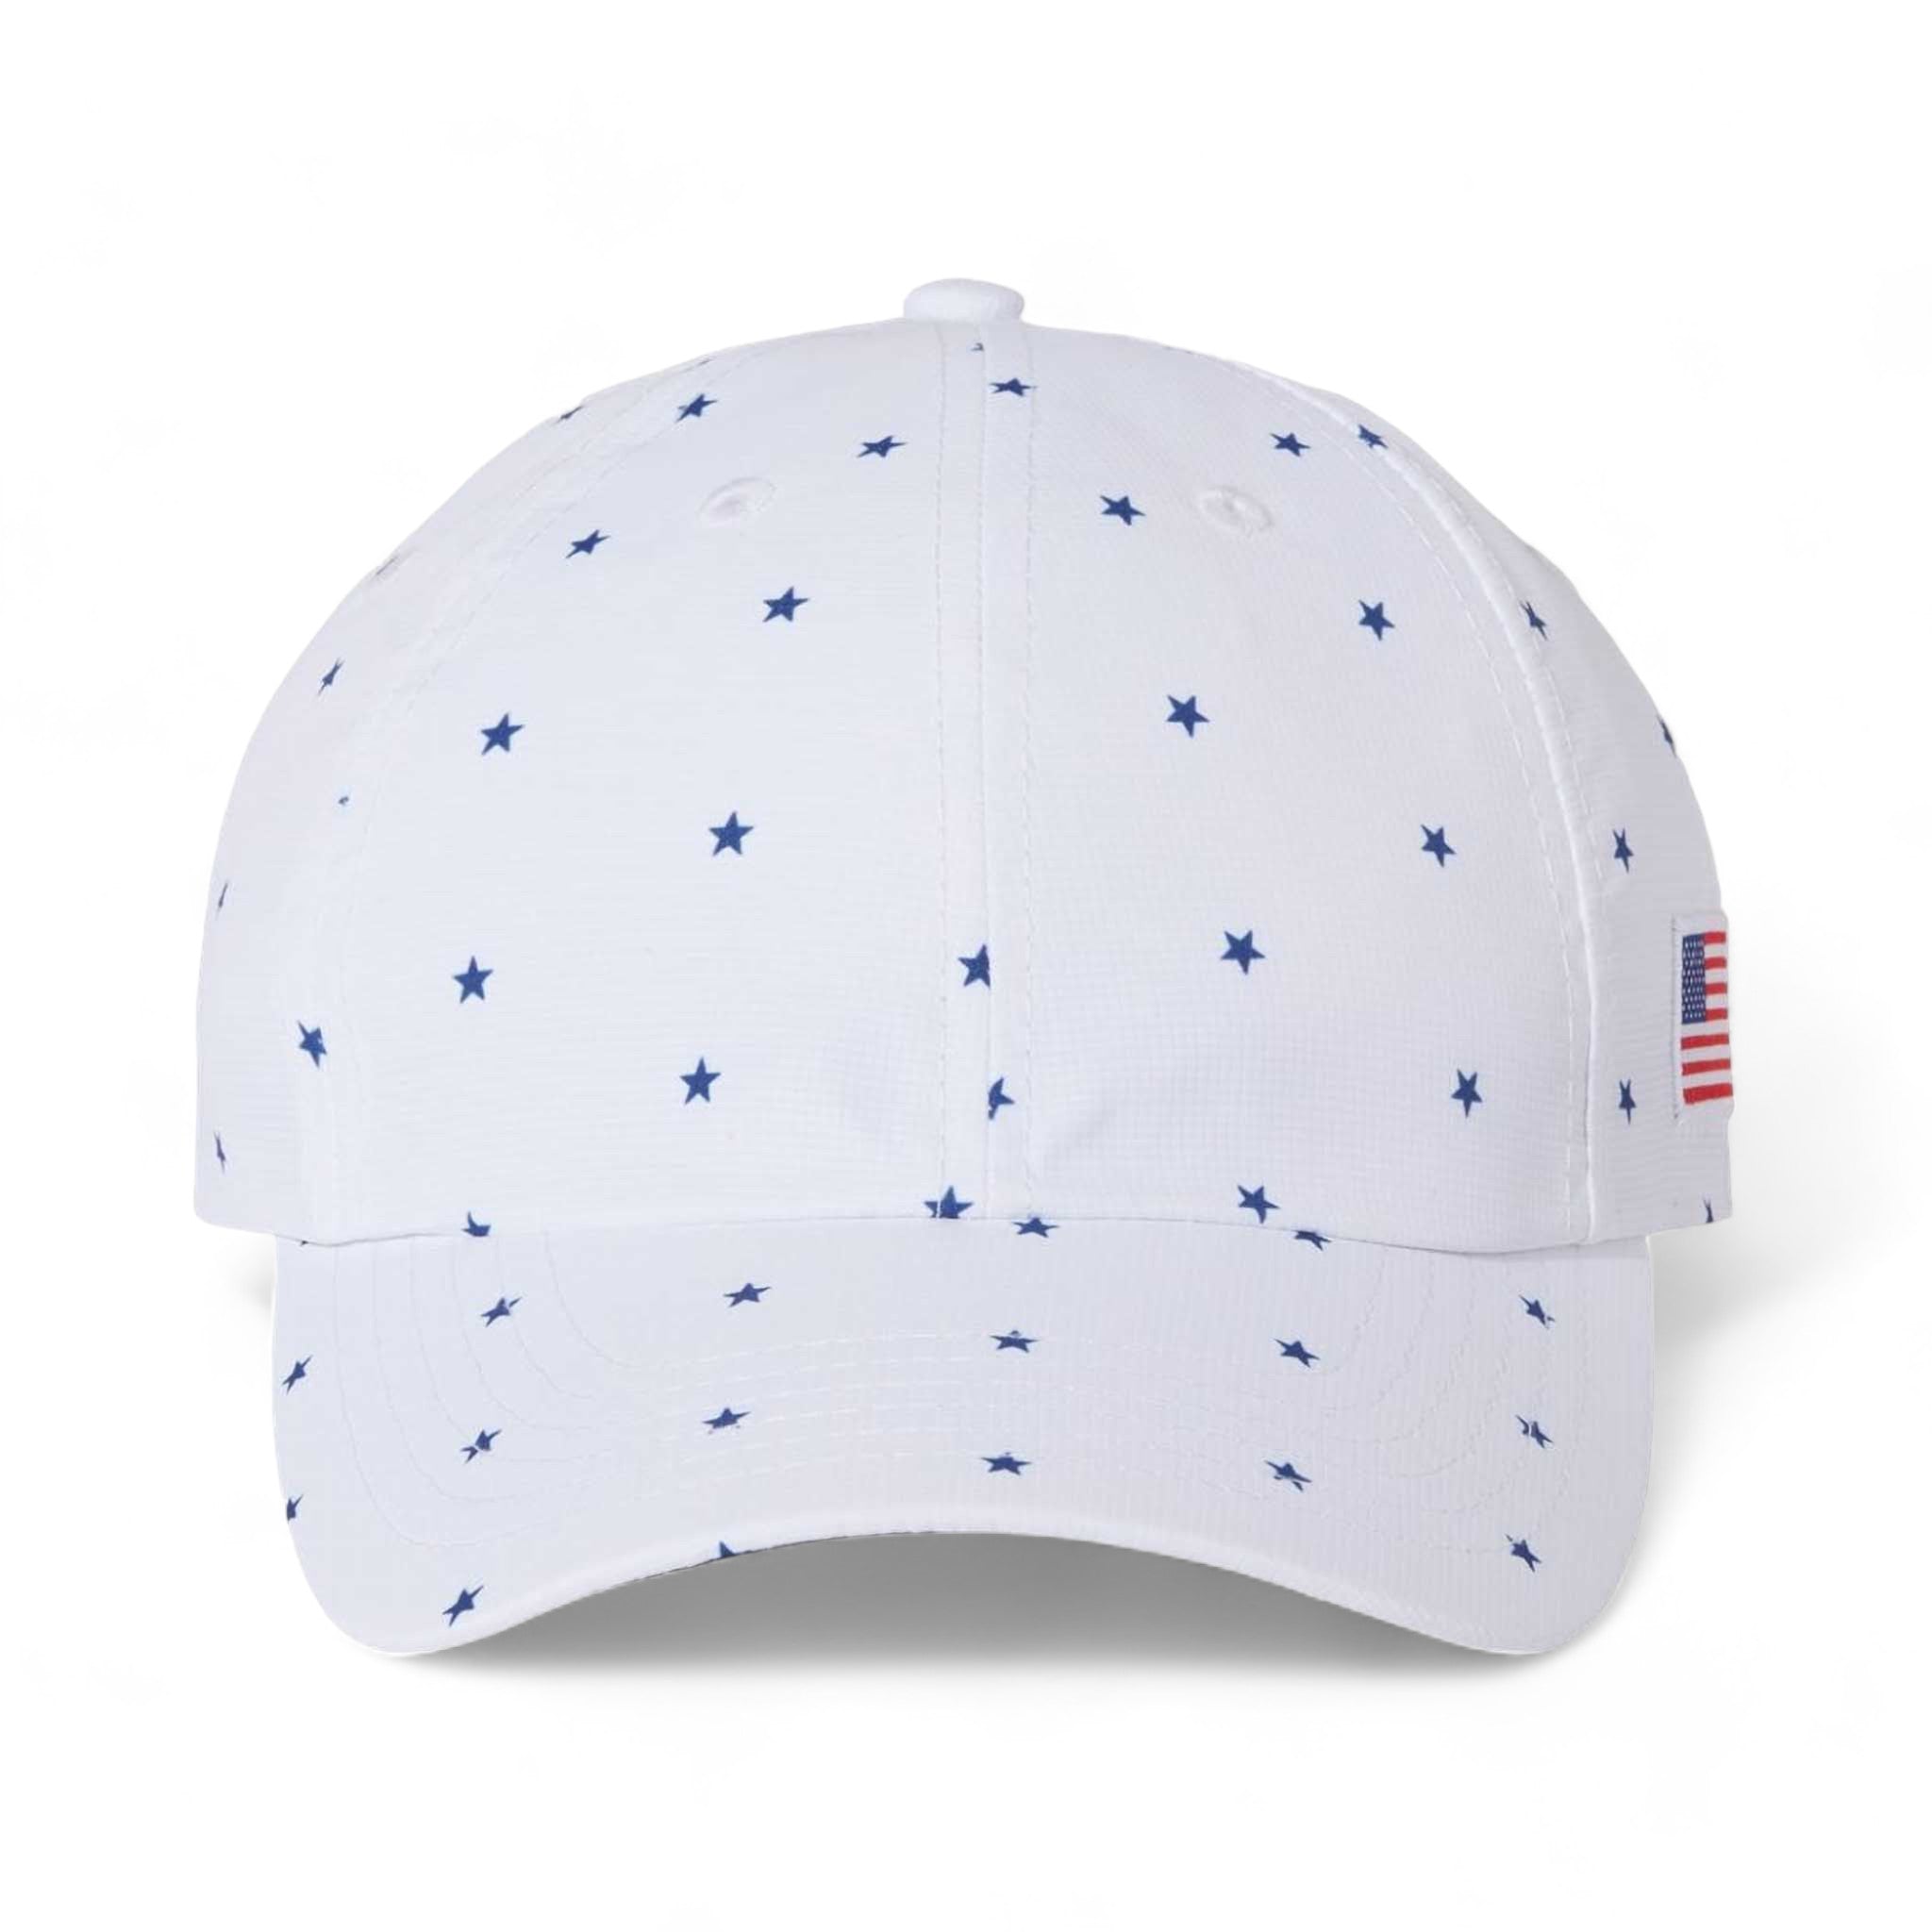 Front view of Imperial X210R custom hat in white stars